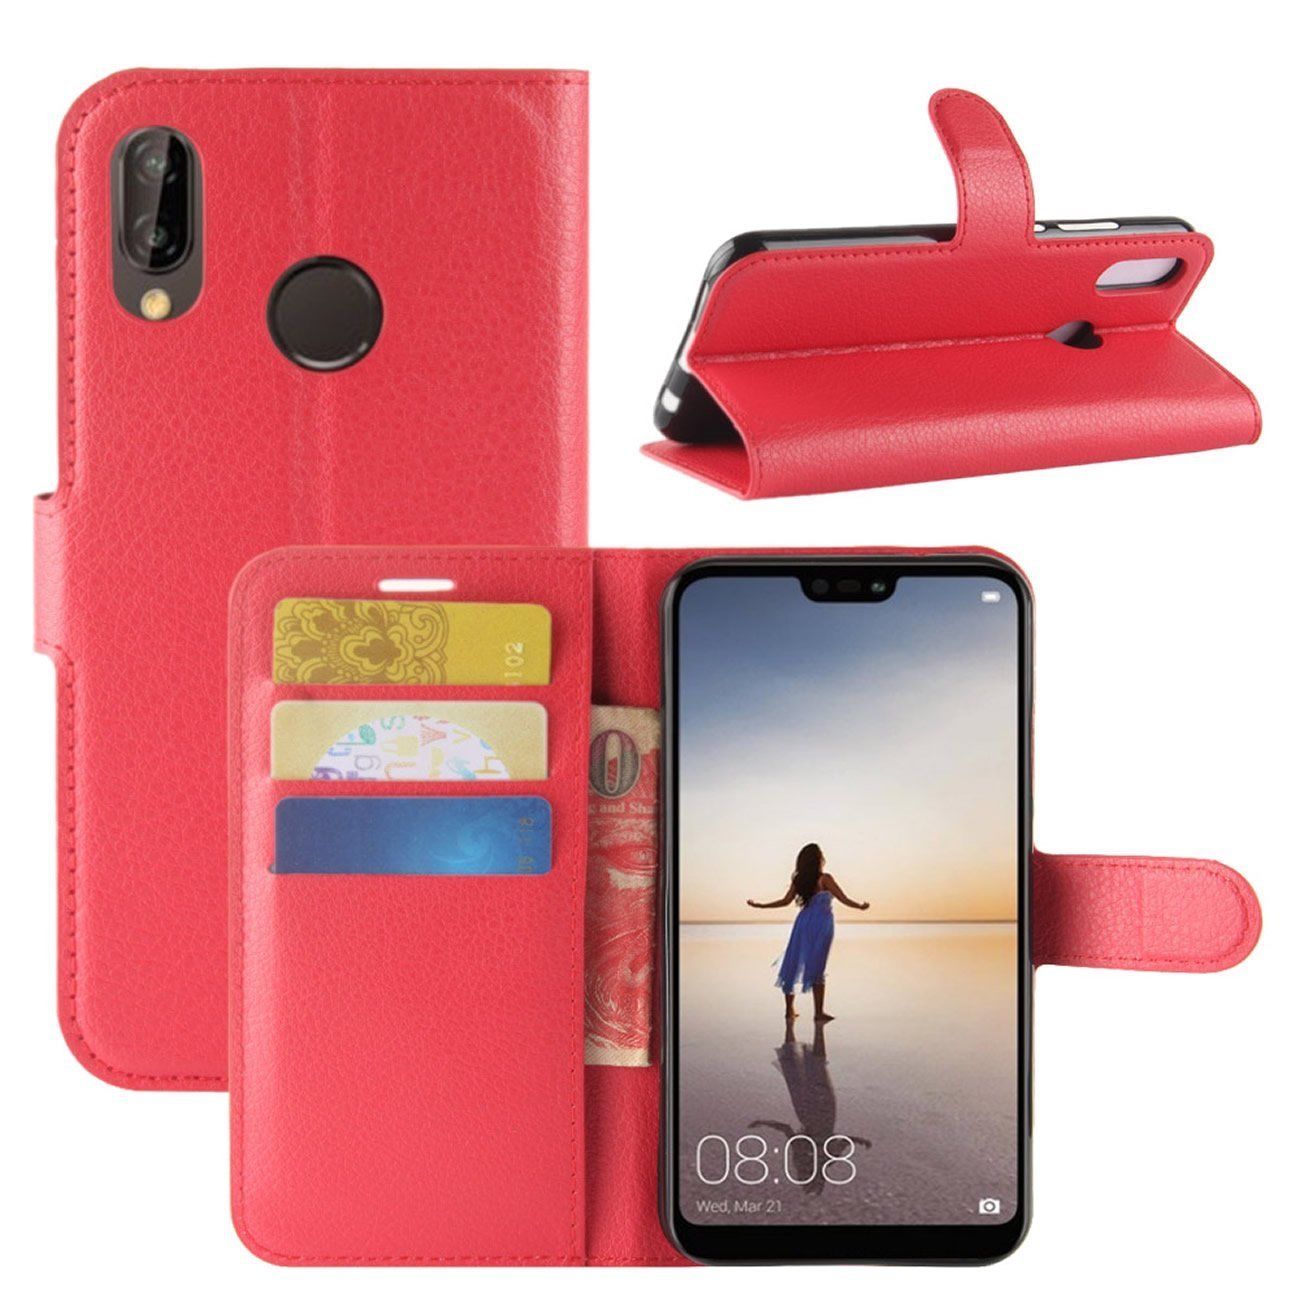 New Premium Leather Wallet Case TPU Cover For HUAWEI Nova 3i-Red